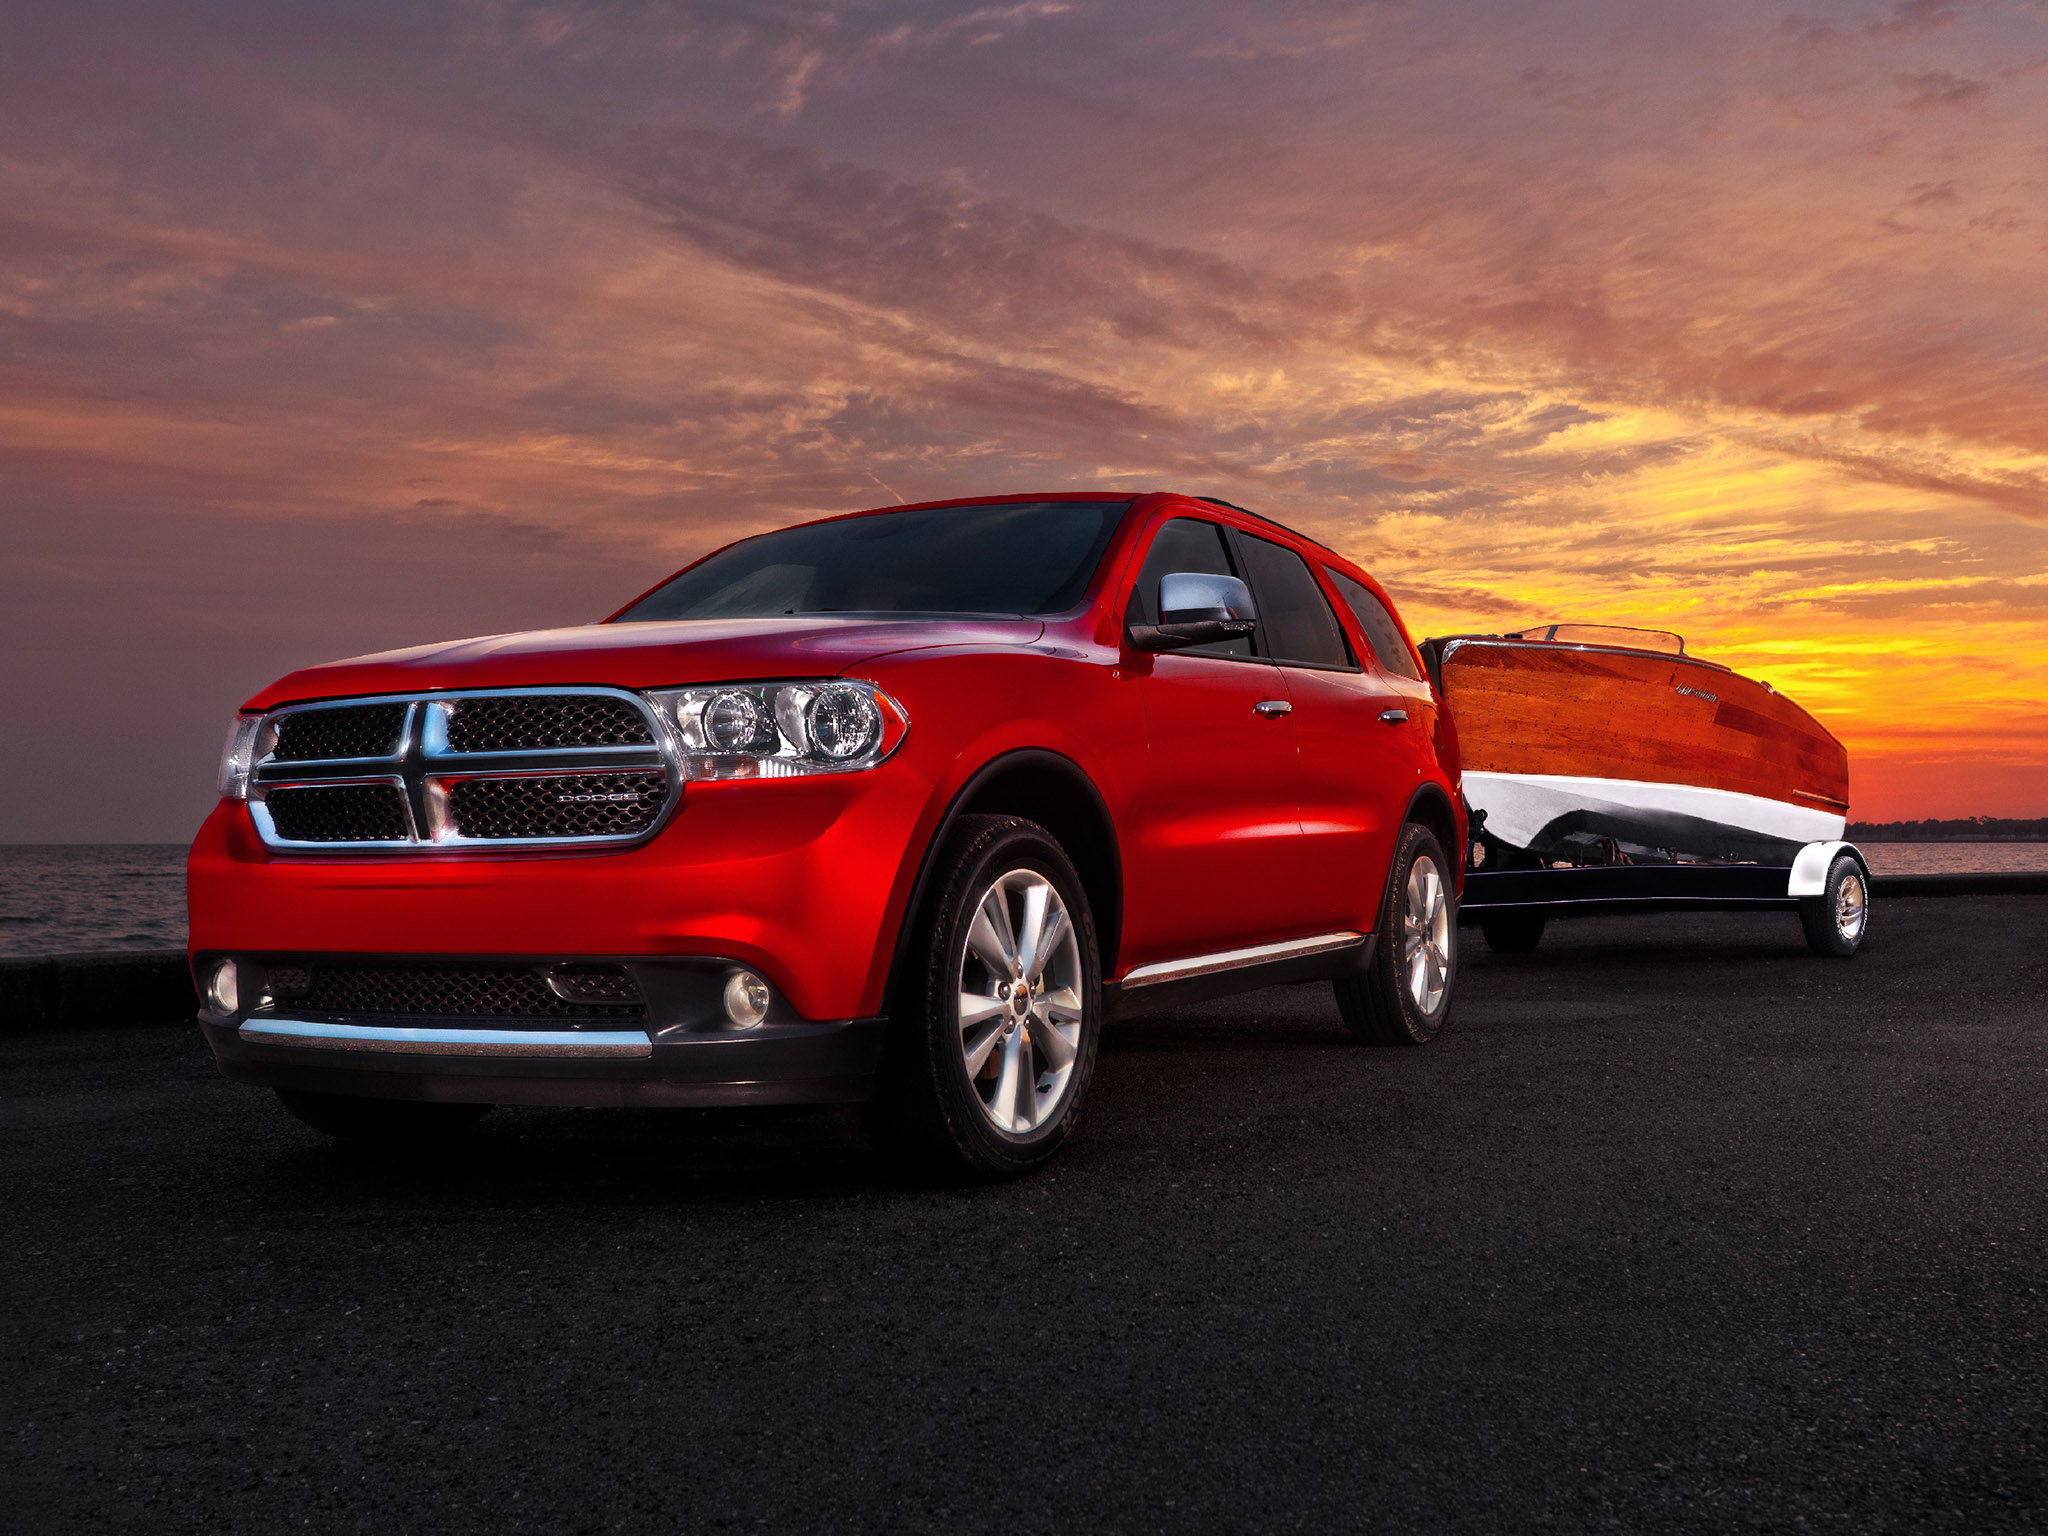 Car in pictures – car photo gallery » Dodge Durango 2010 Photo 08